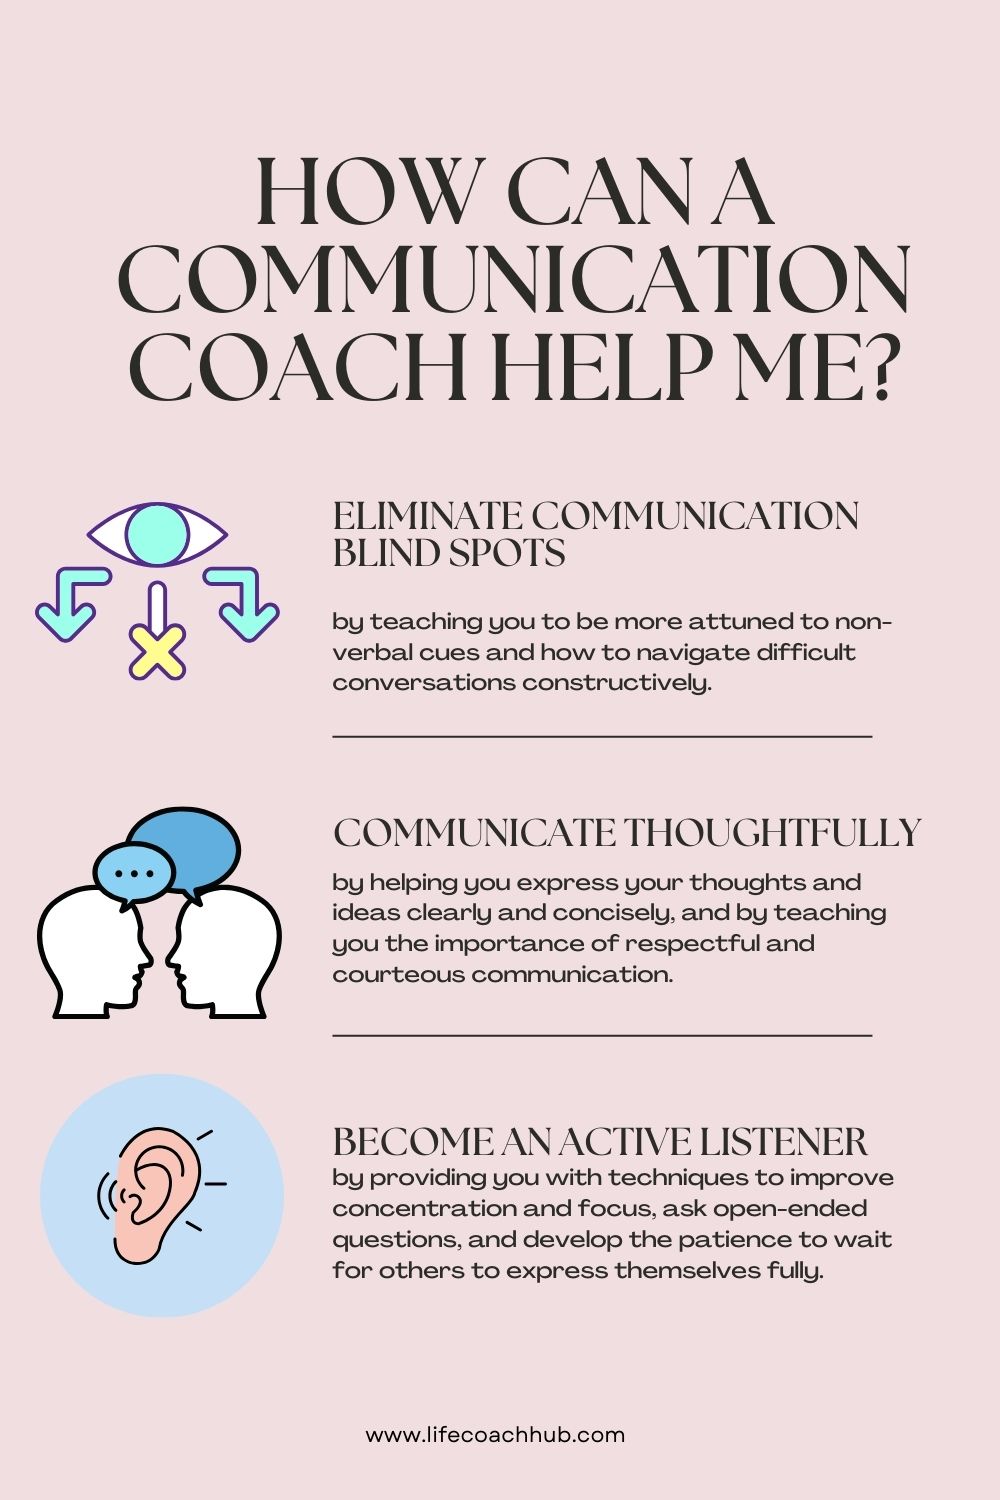 How can a communication coach help me?